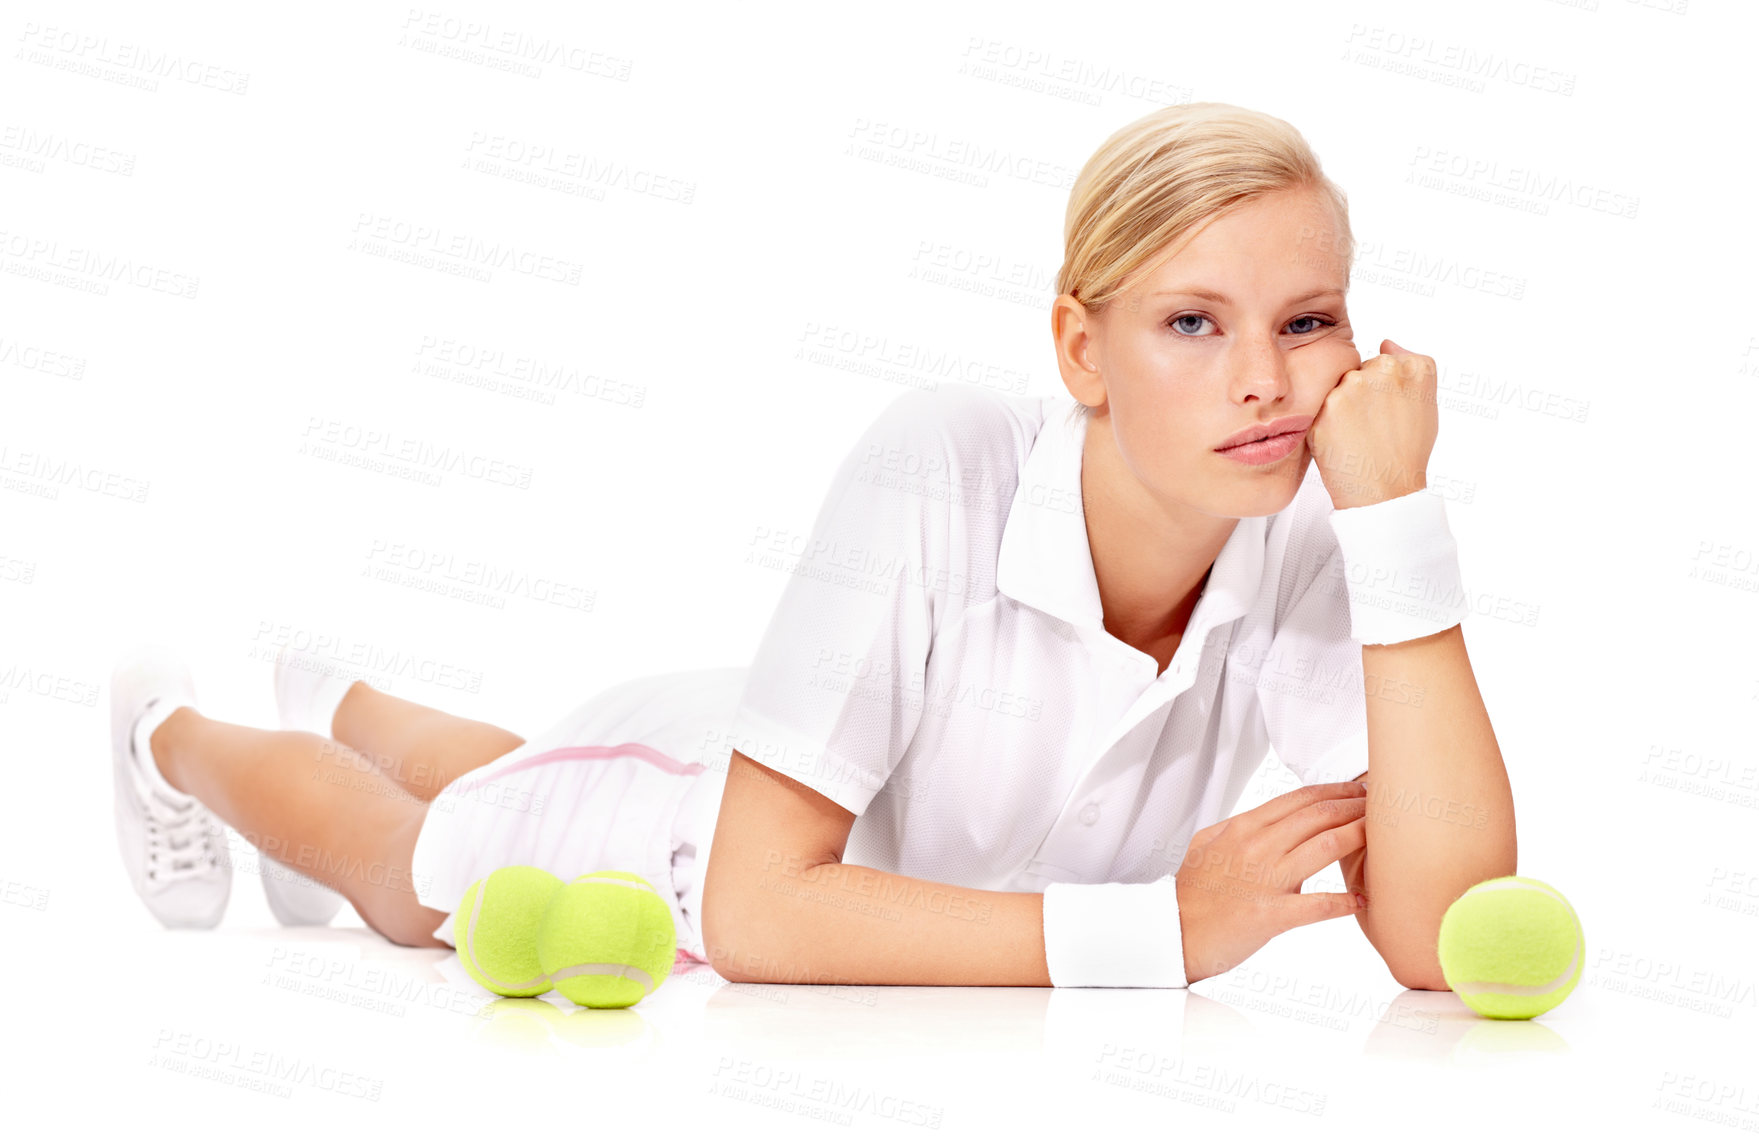 Buy stock photo Portrait, ball and a bored woman or tennis player in studio isolated on white background for sports or fitness. Exercise, workout and training with a tired or exhausted athlete lying on the ground